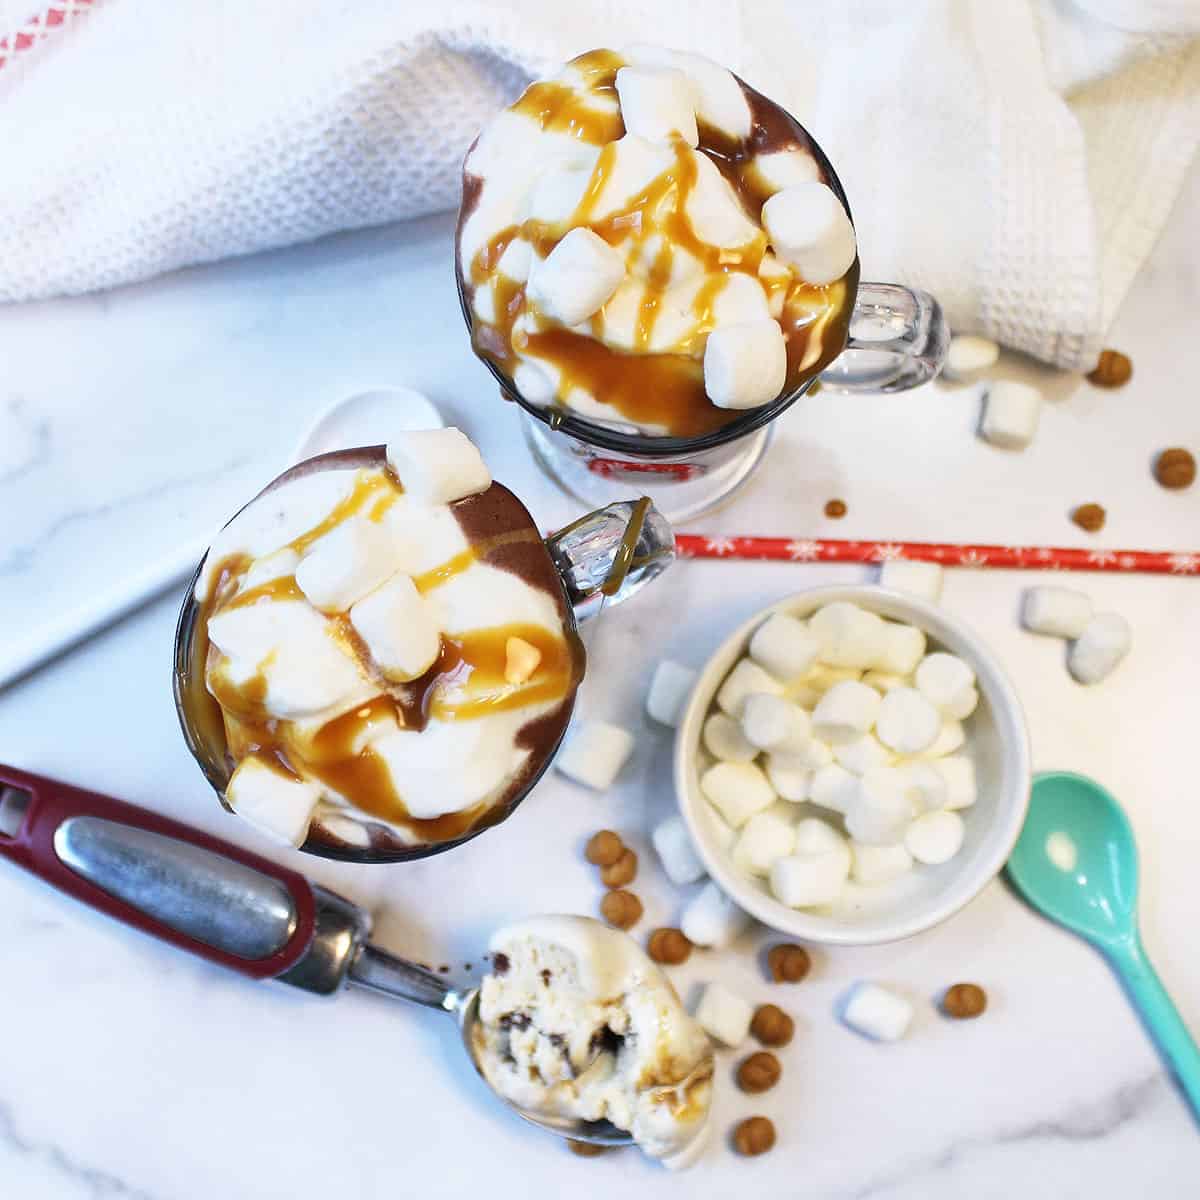 Overhead of hot chocolate with whipped cream, marshmallows and caramel sauce.